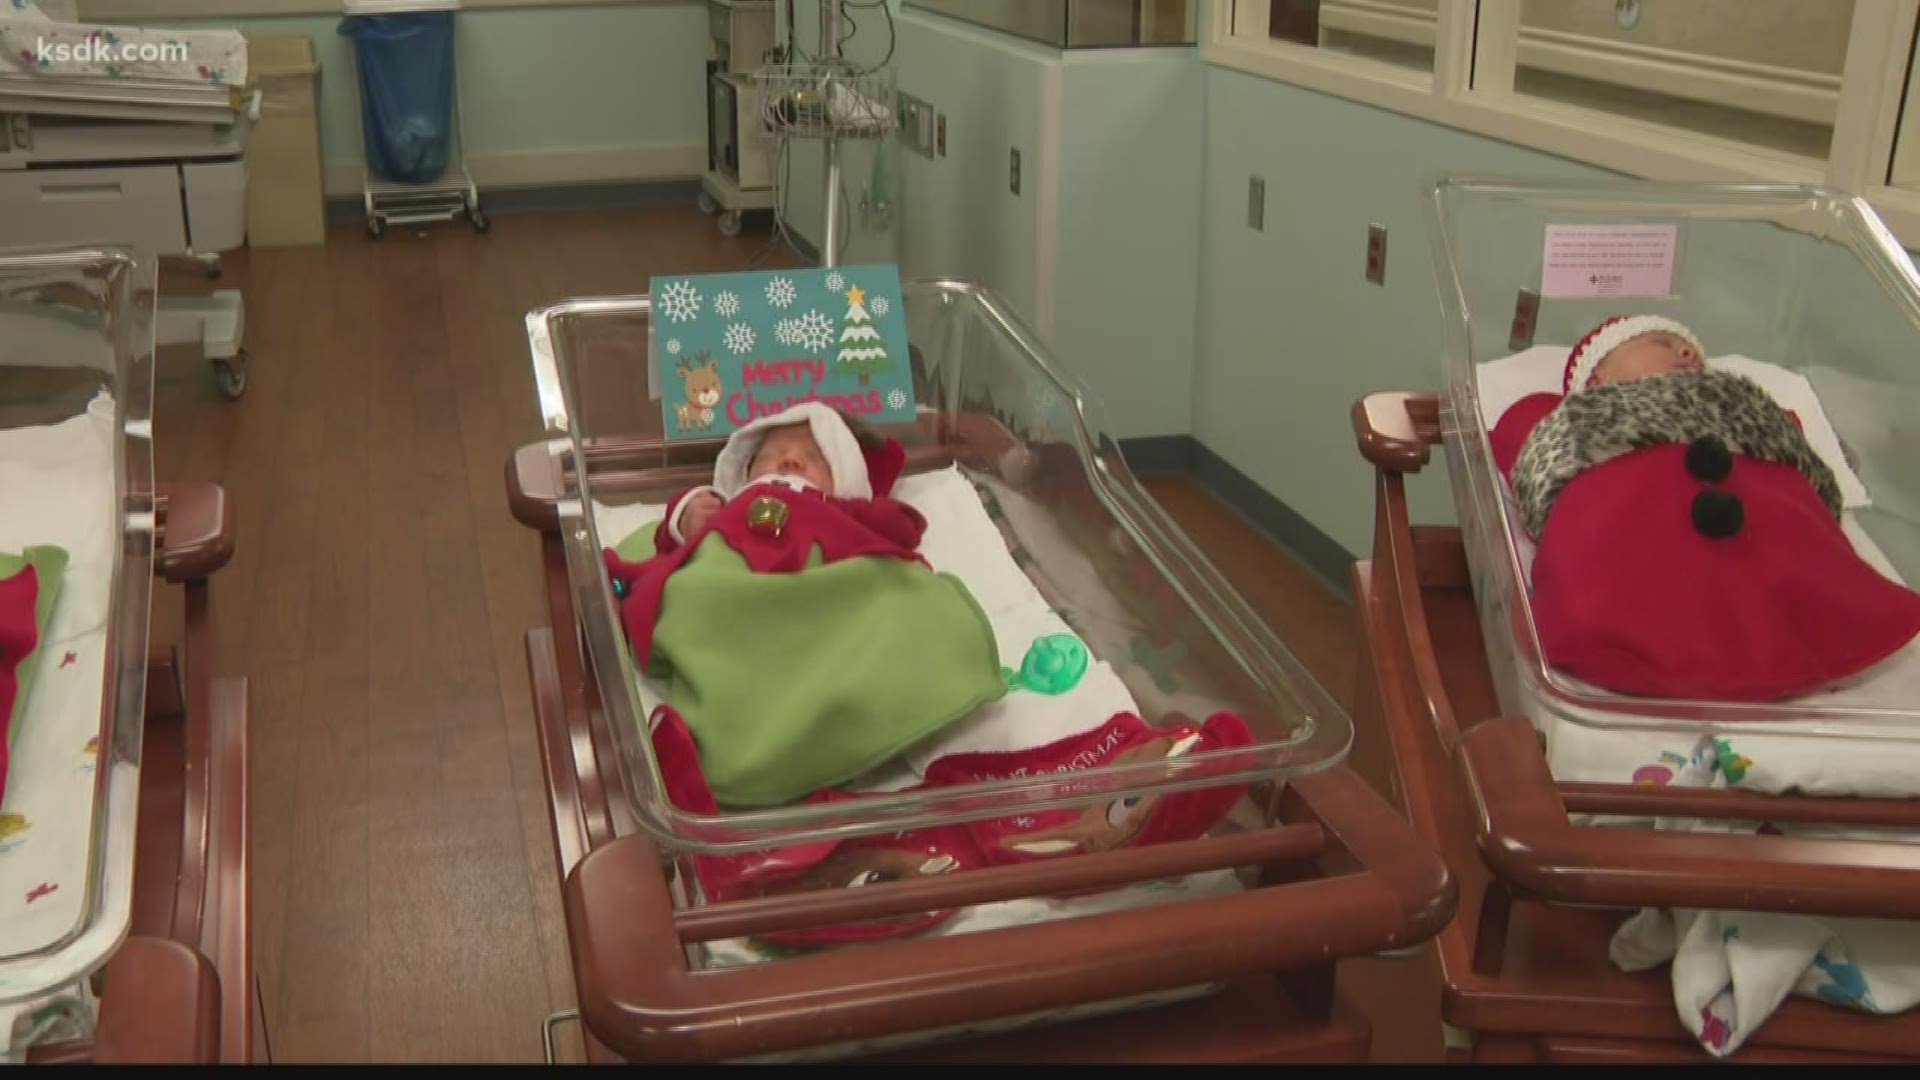 Babies born at St. Luke's on Christmas were decked out in holiday-themed outfits to celebrate their first Christmas.